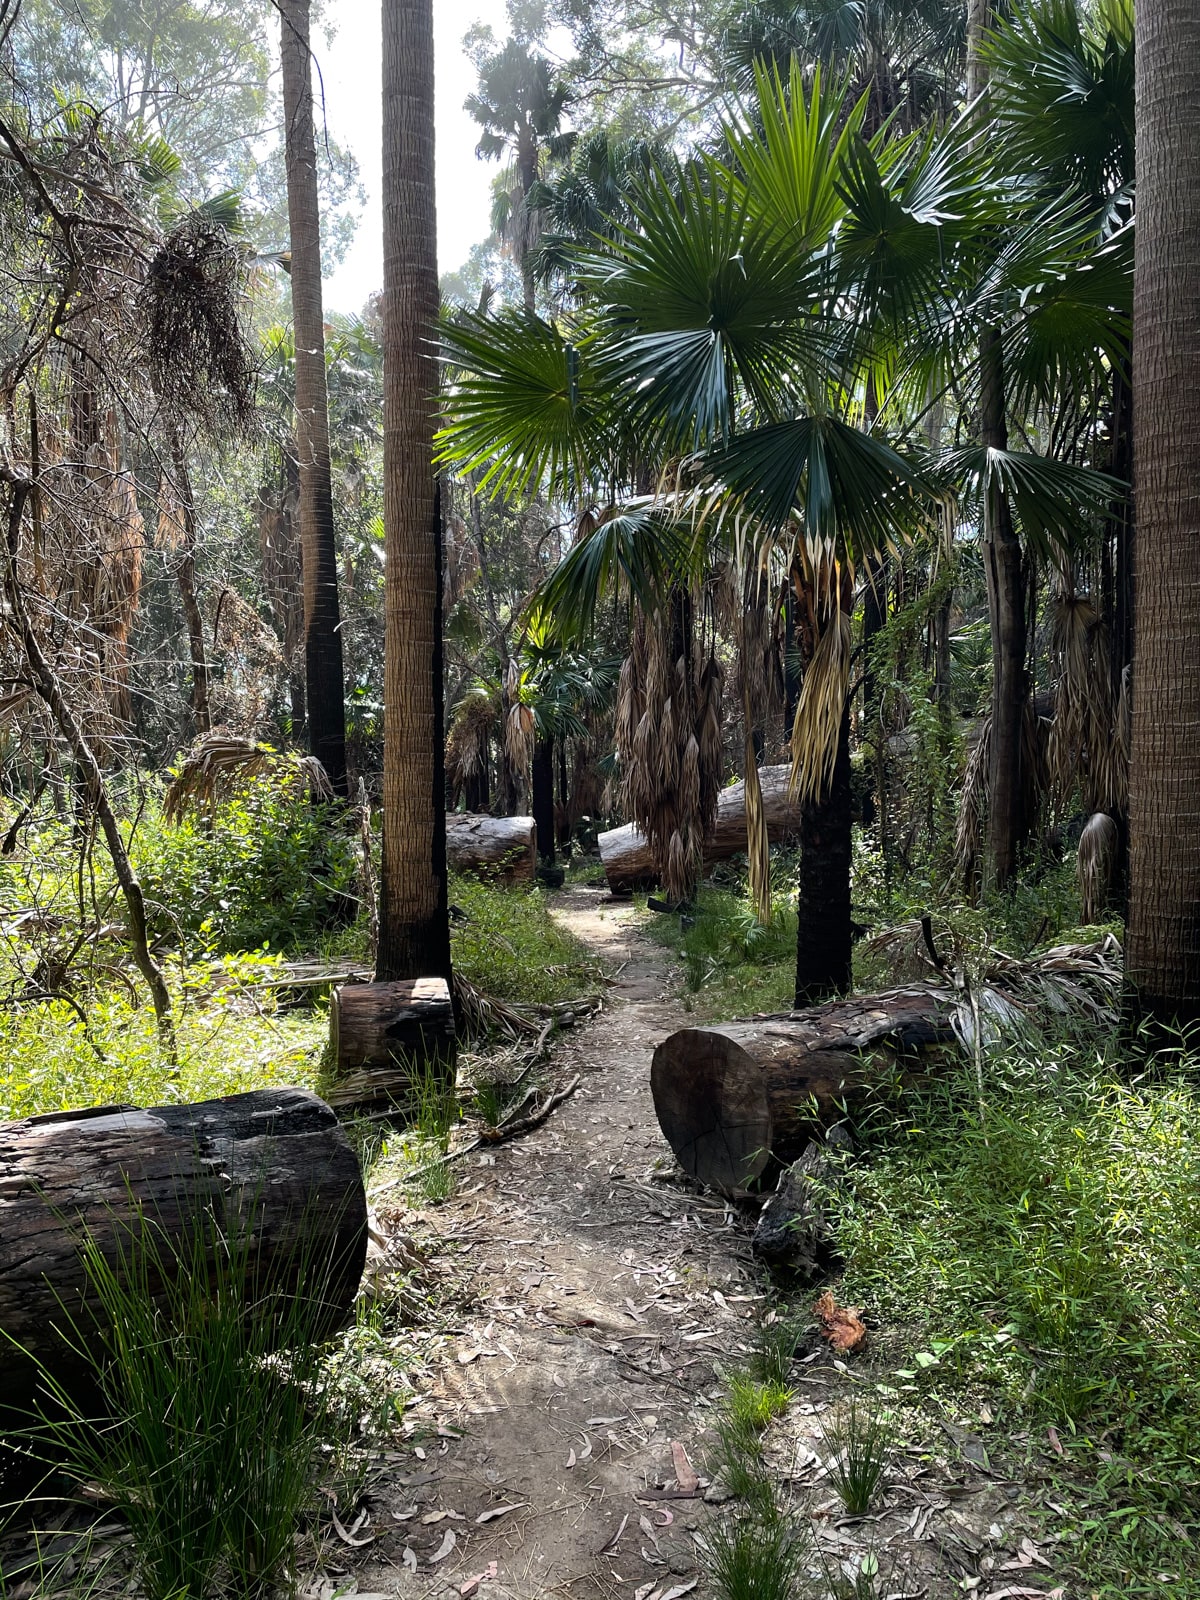 A path through a rainforest walk. Different kinds of trees and plants are visible, and fallen and cut tree trunks sit around the path